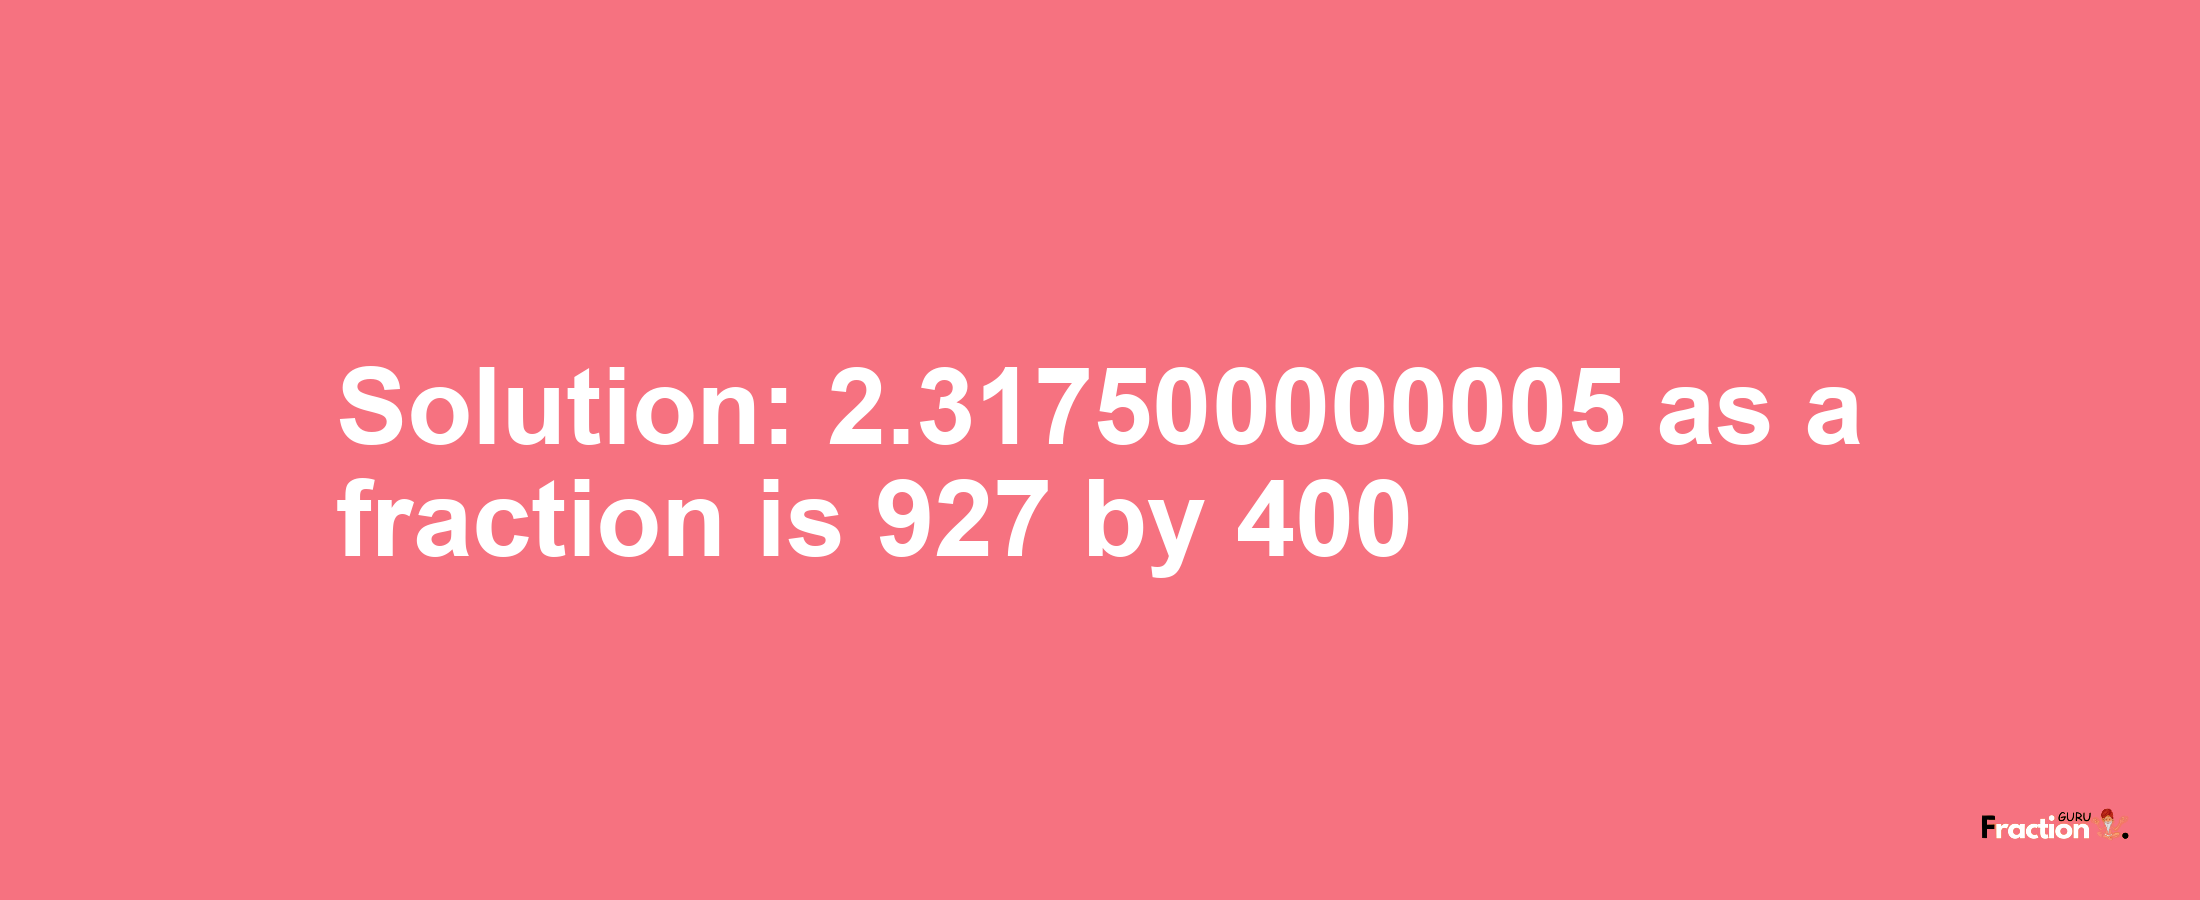 Solution:2.317500000005 as a fraction is 927/400